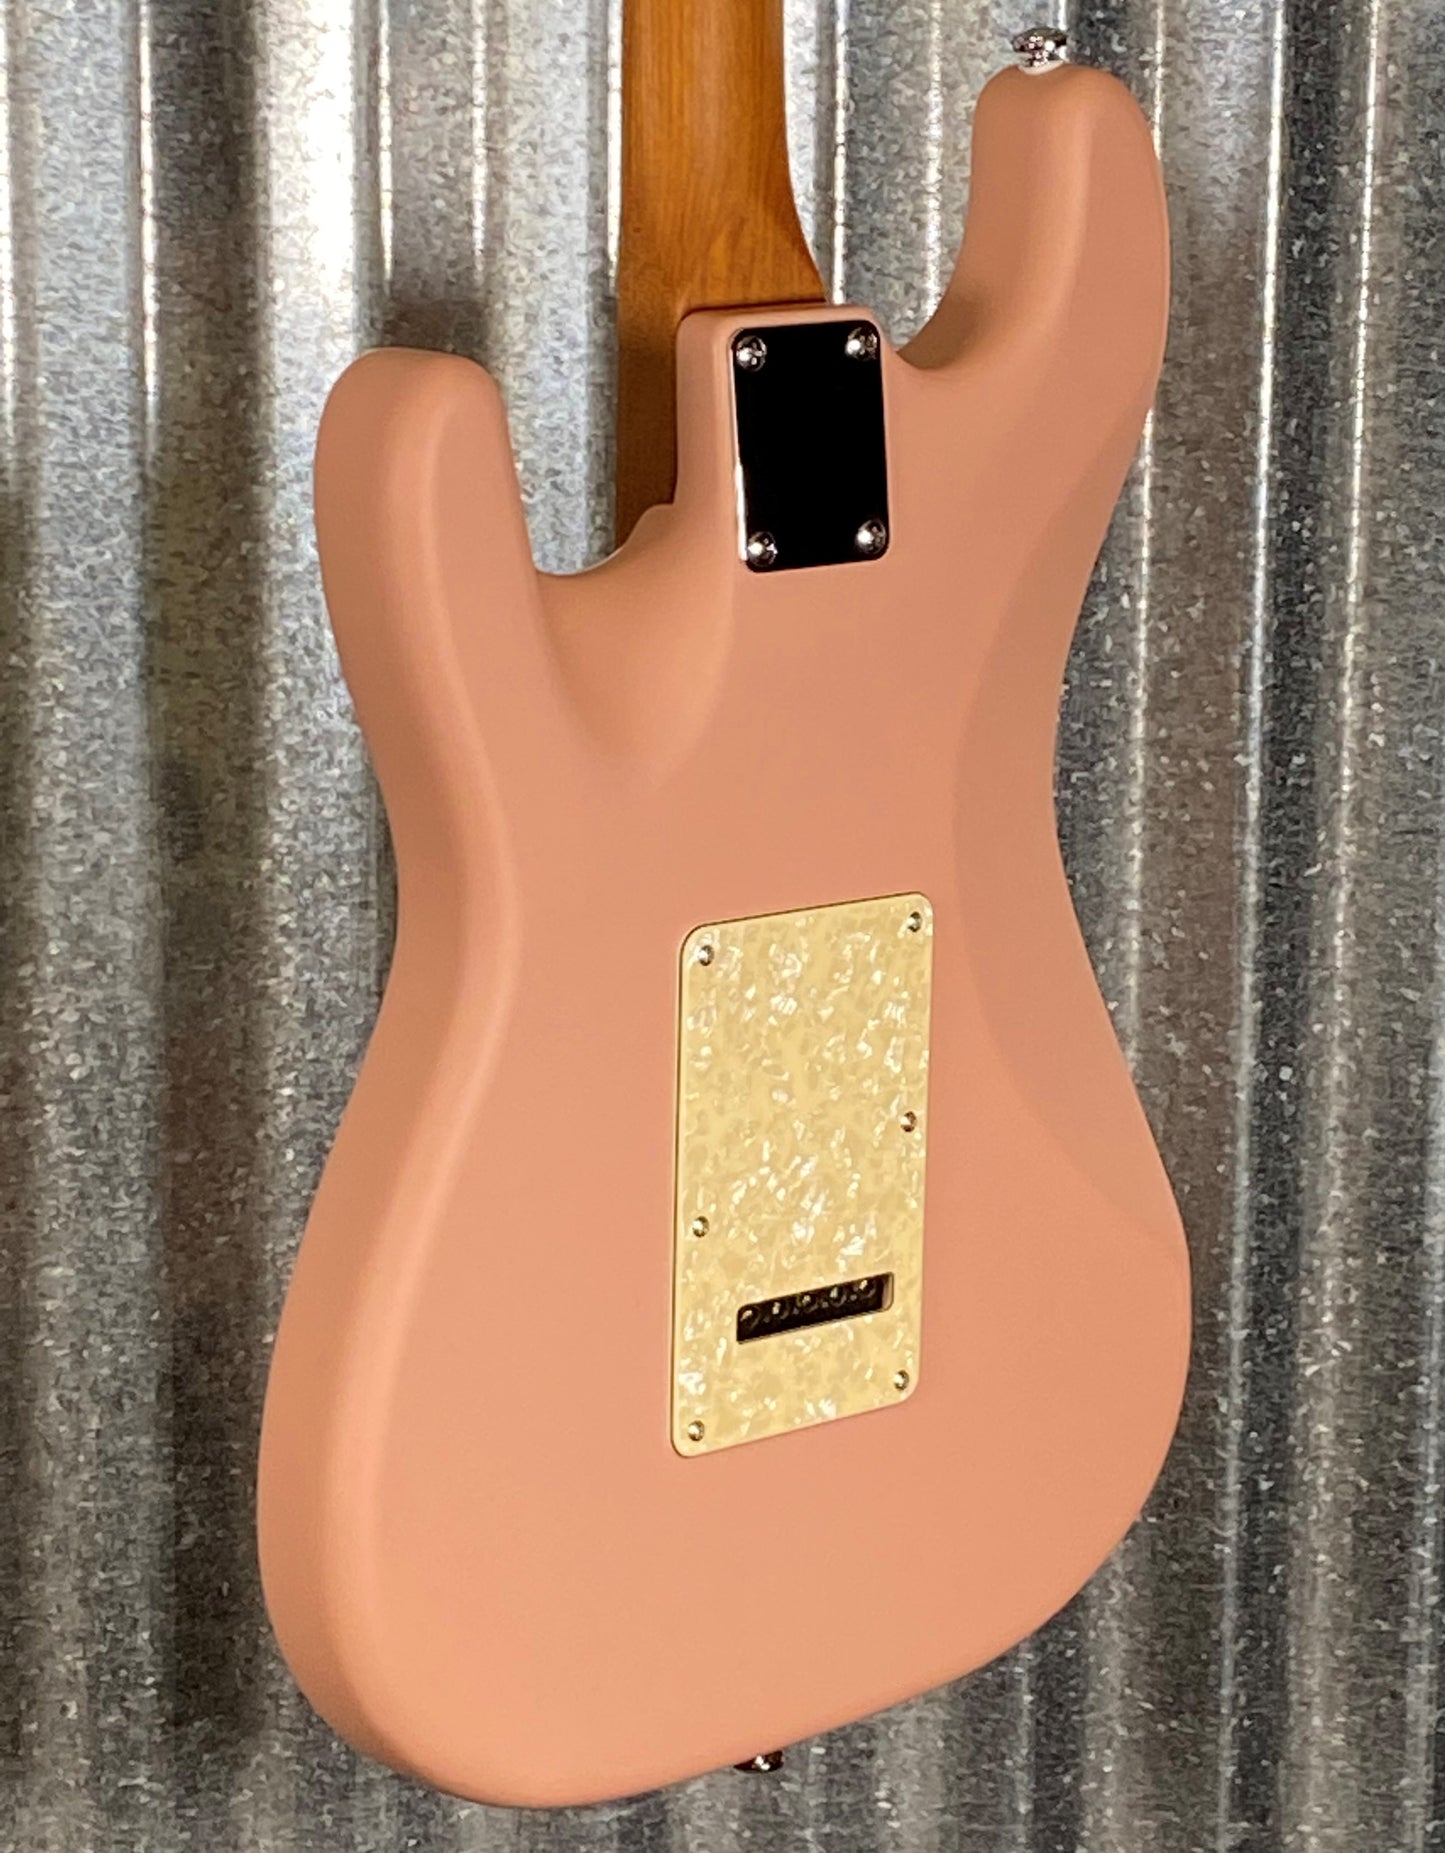 Musi Capricorn Classic HSS Stratocaster Matte Shell Pink Guitar #5105 Used